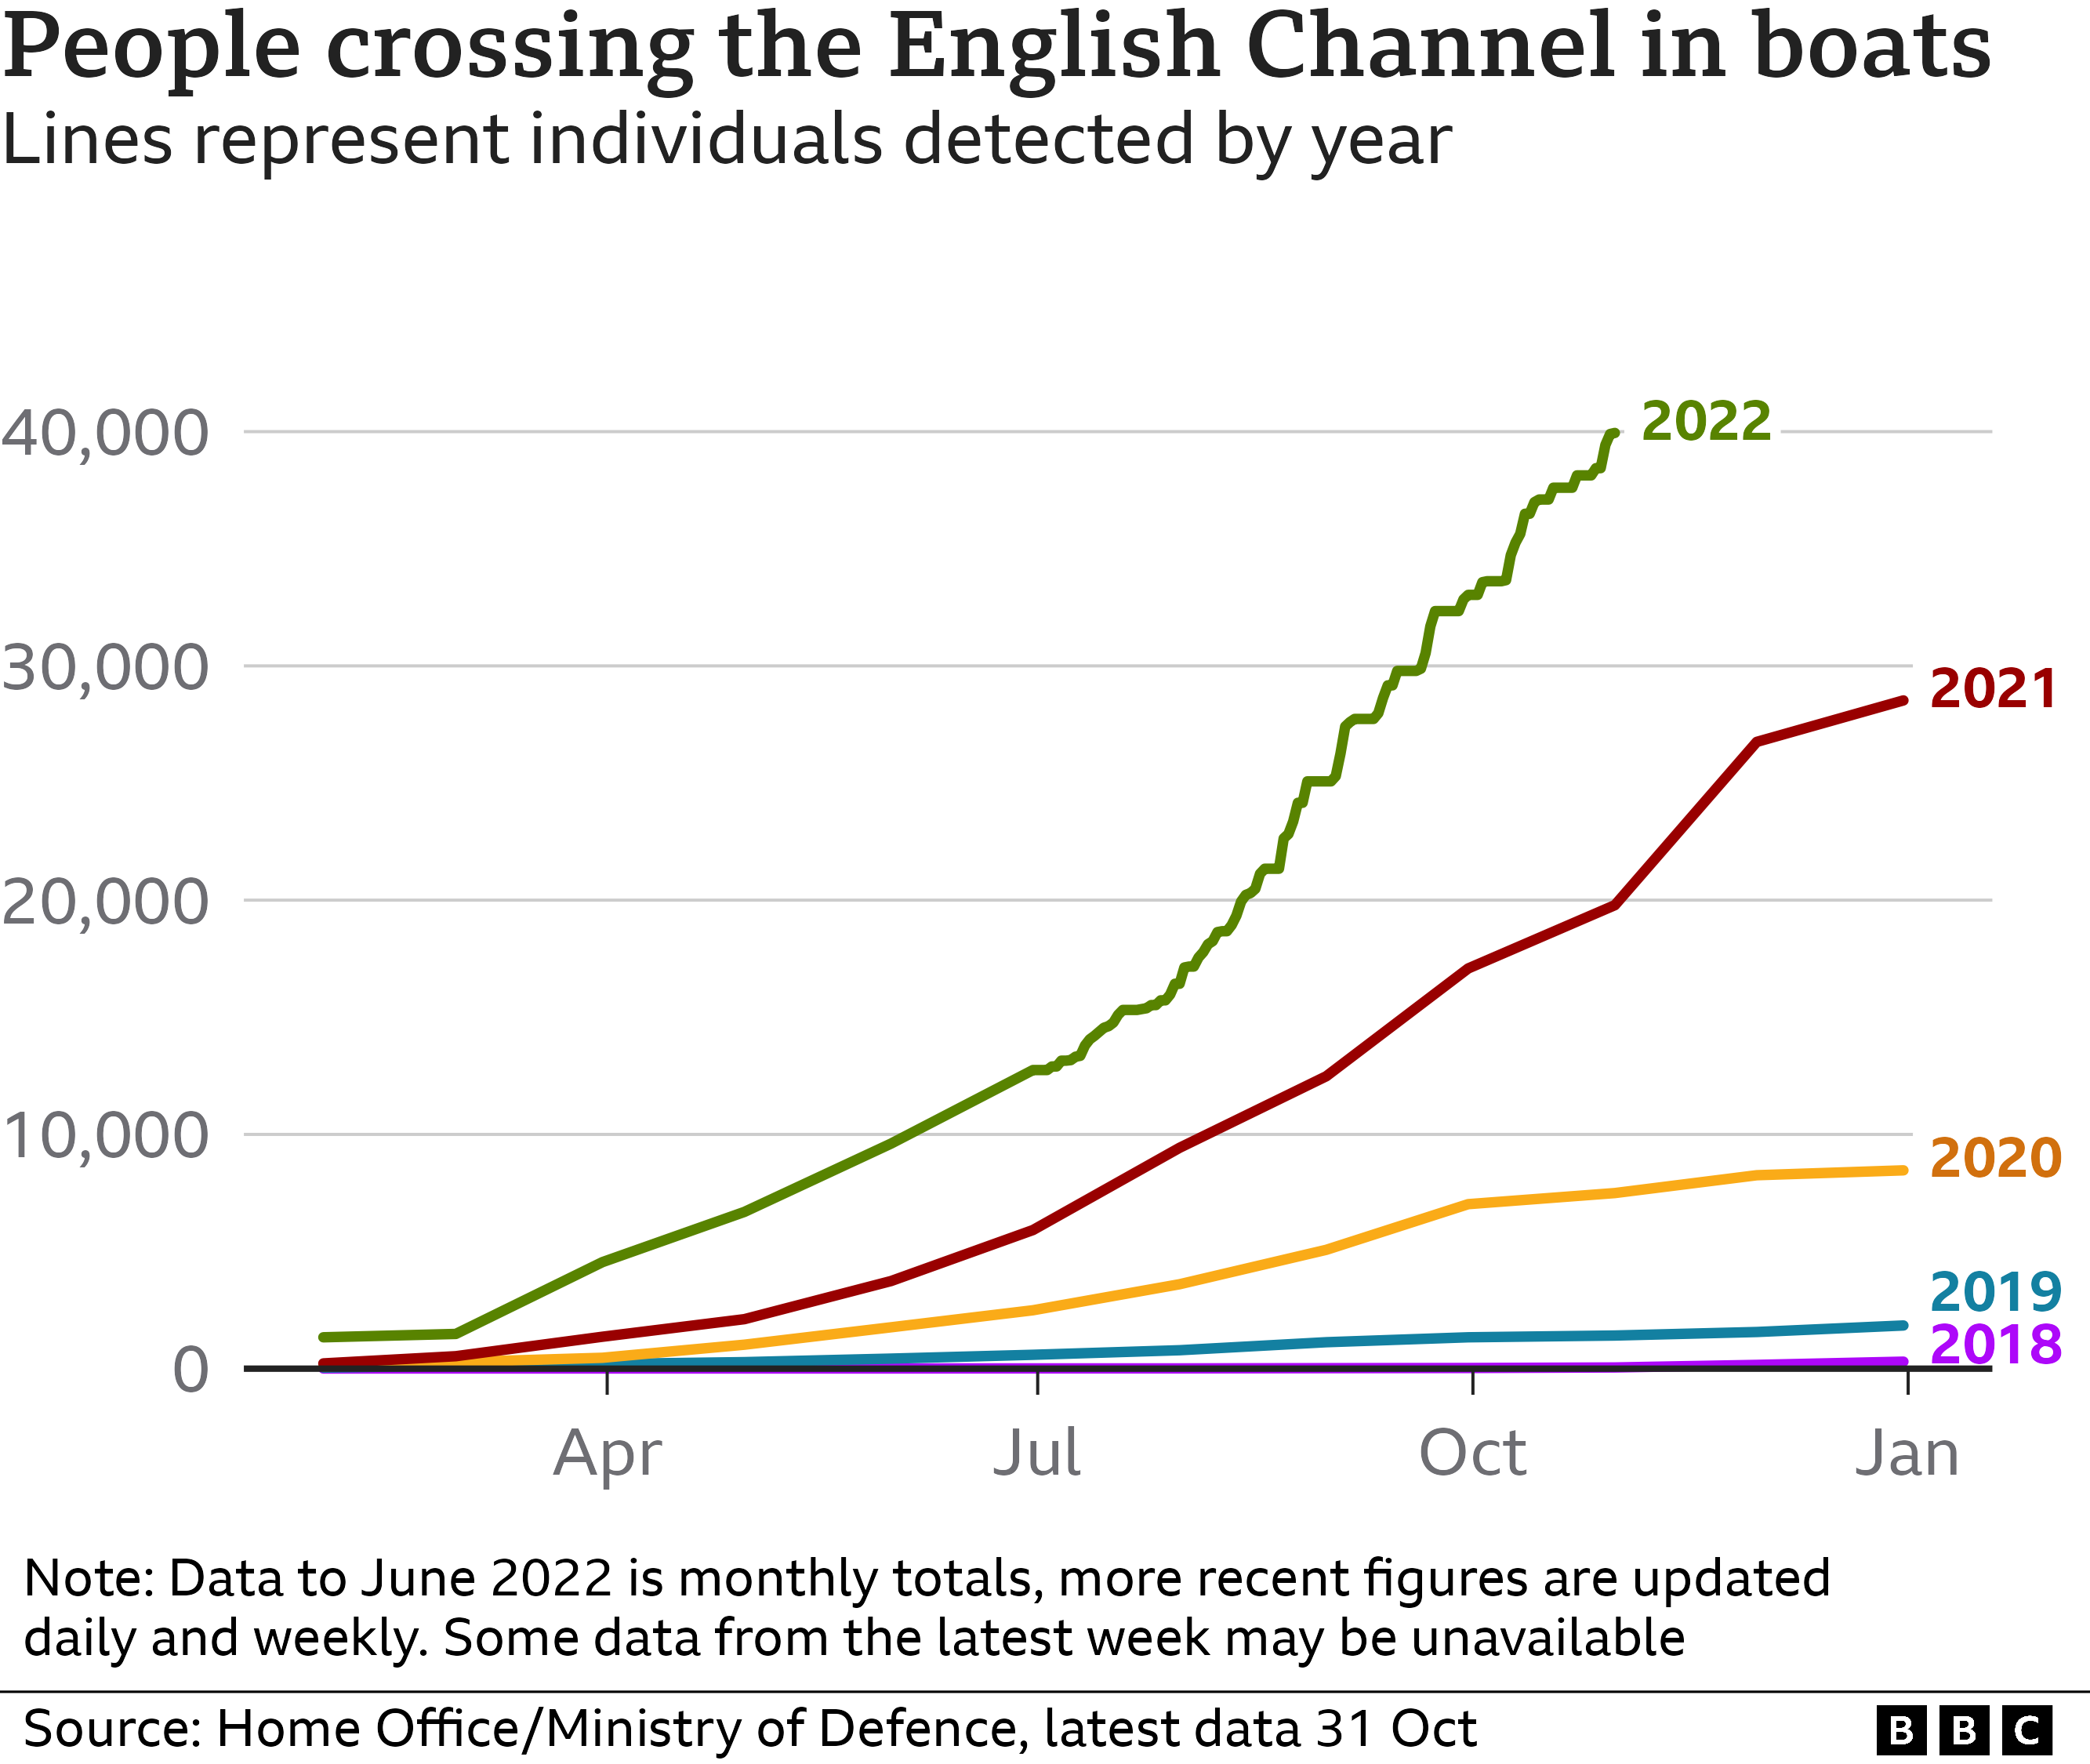 Graphs showing the year on year numbers crossing the channel